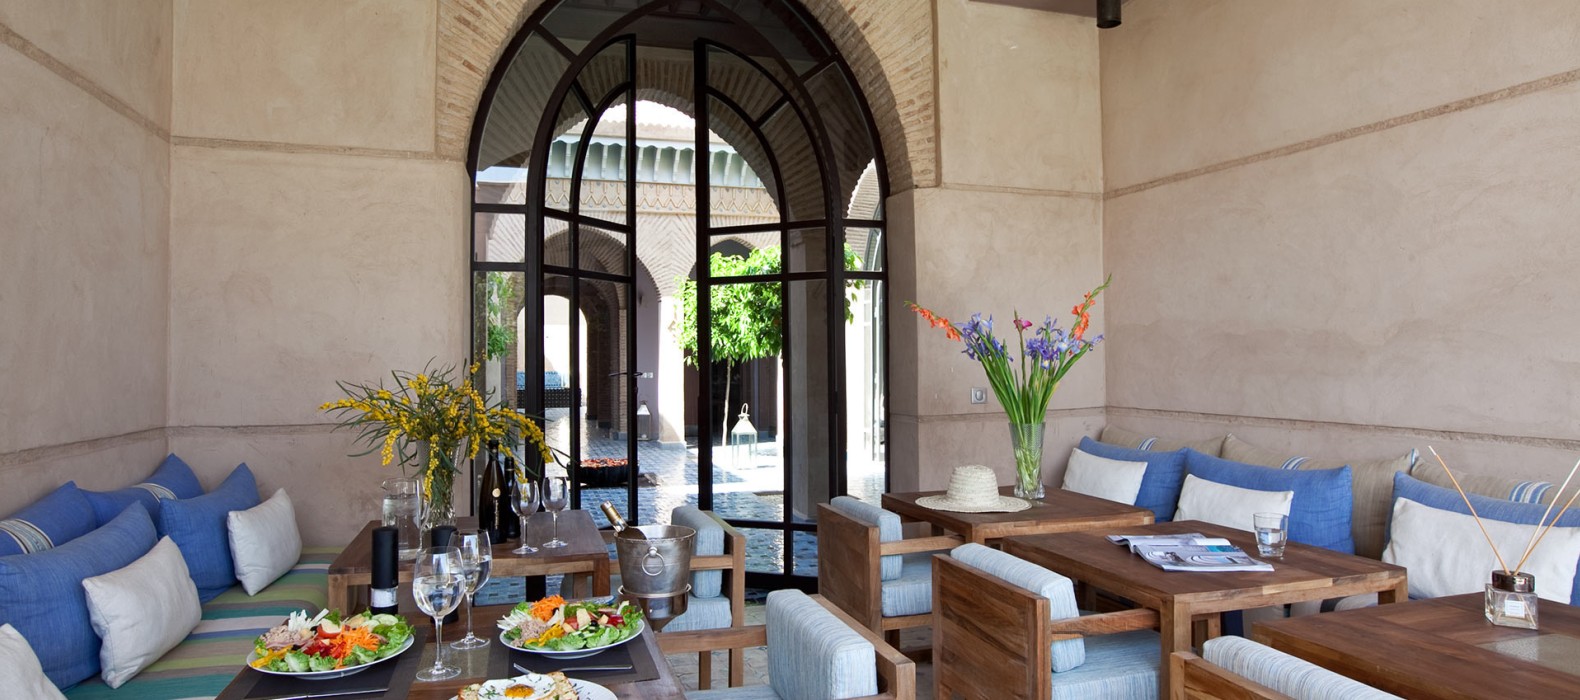 Dining area view of Villa Youne in Marrakech